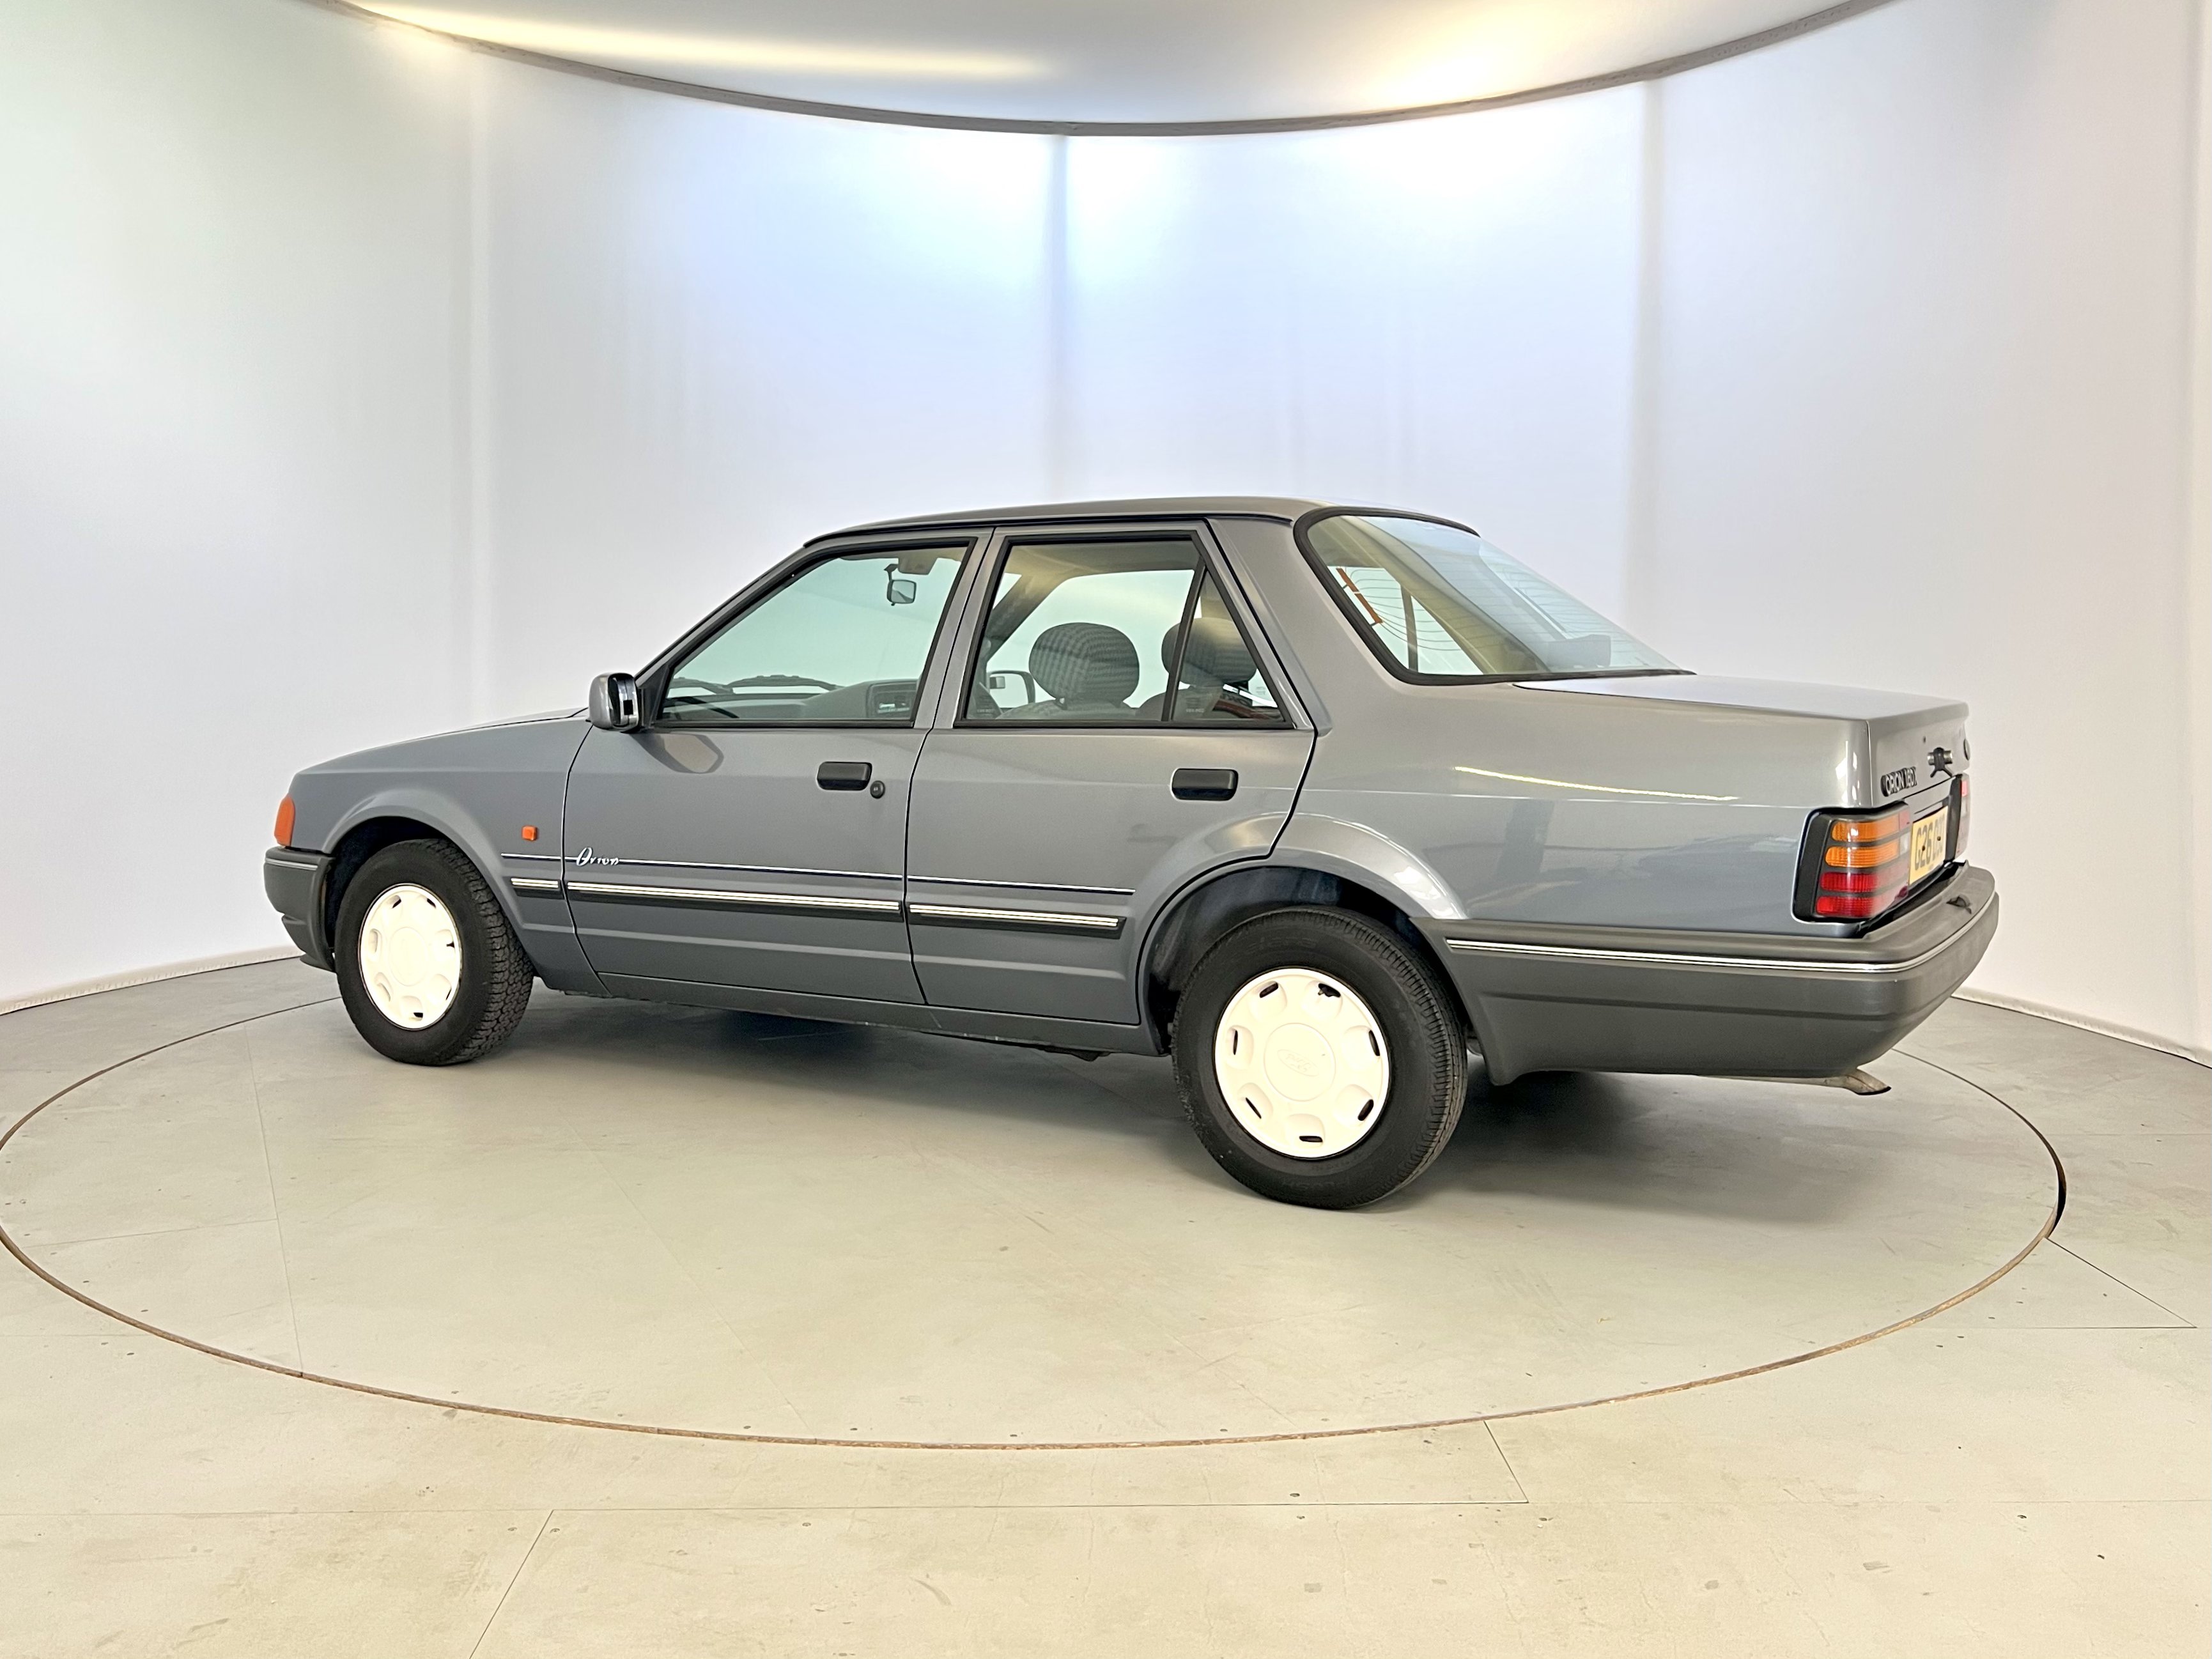 Ford Orion DX - Image 6 of 34